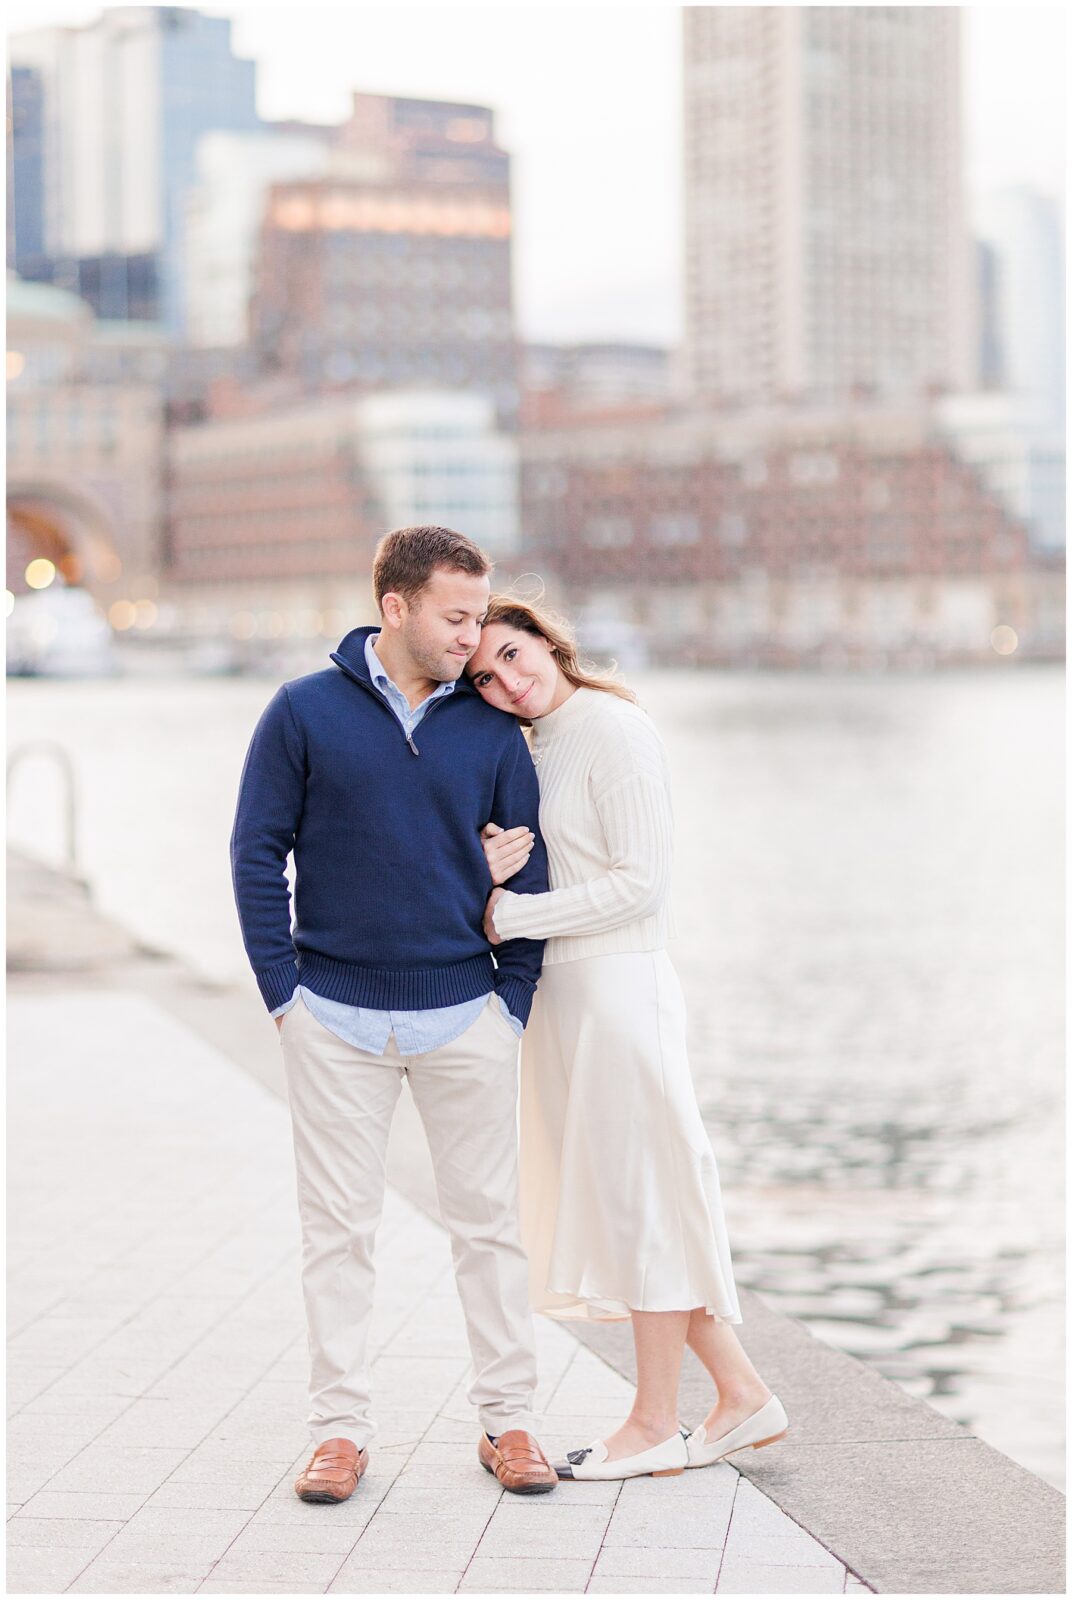 Woman resting her head on man during Boston Seaport engagement session.